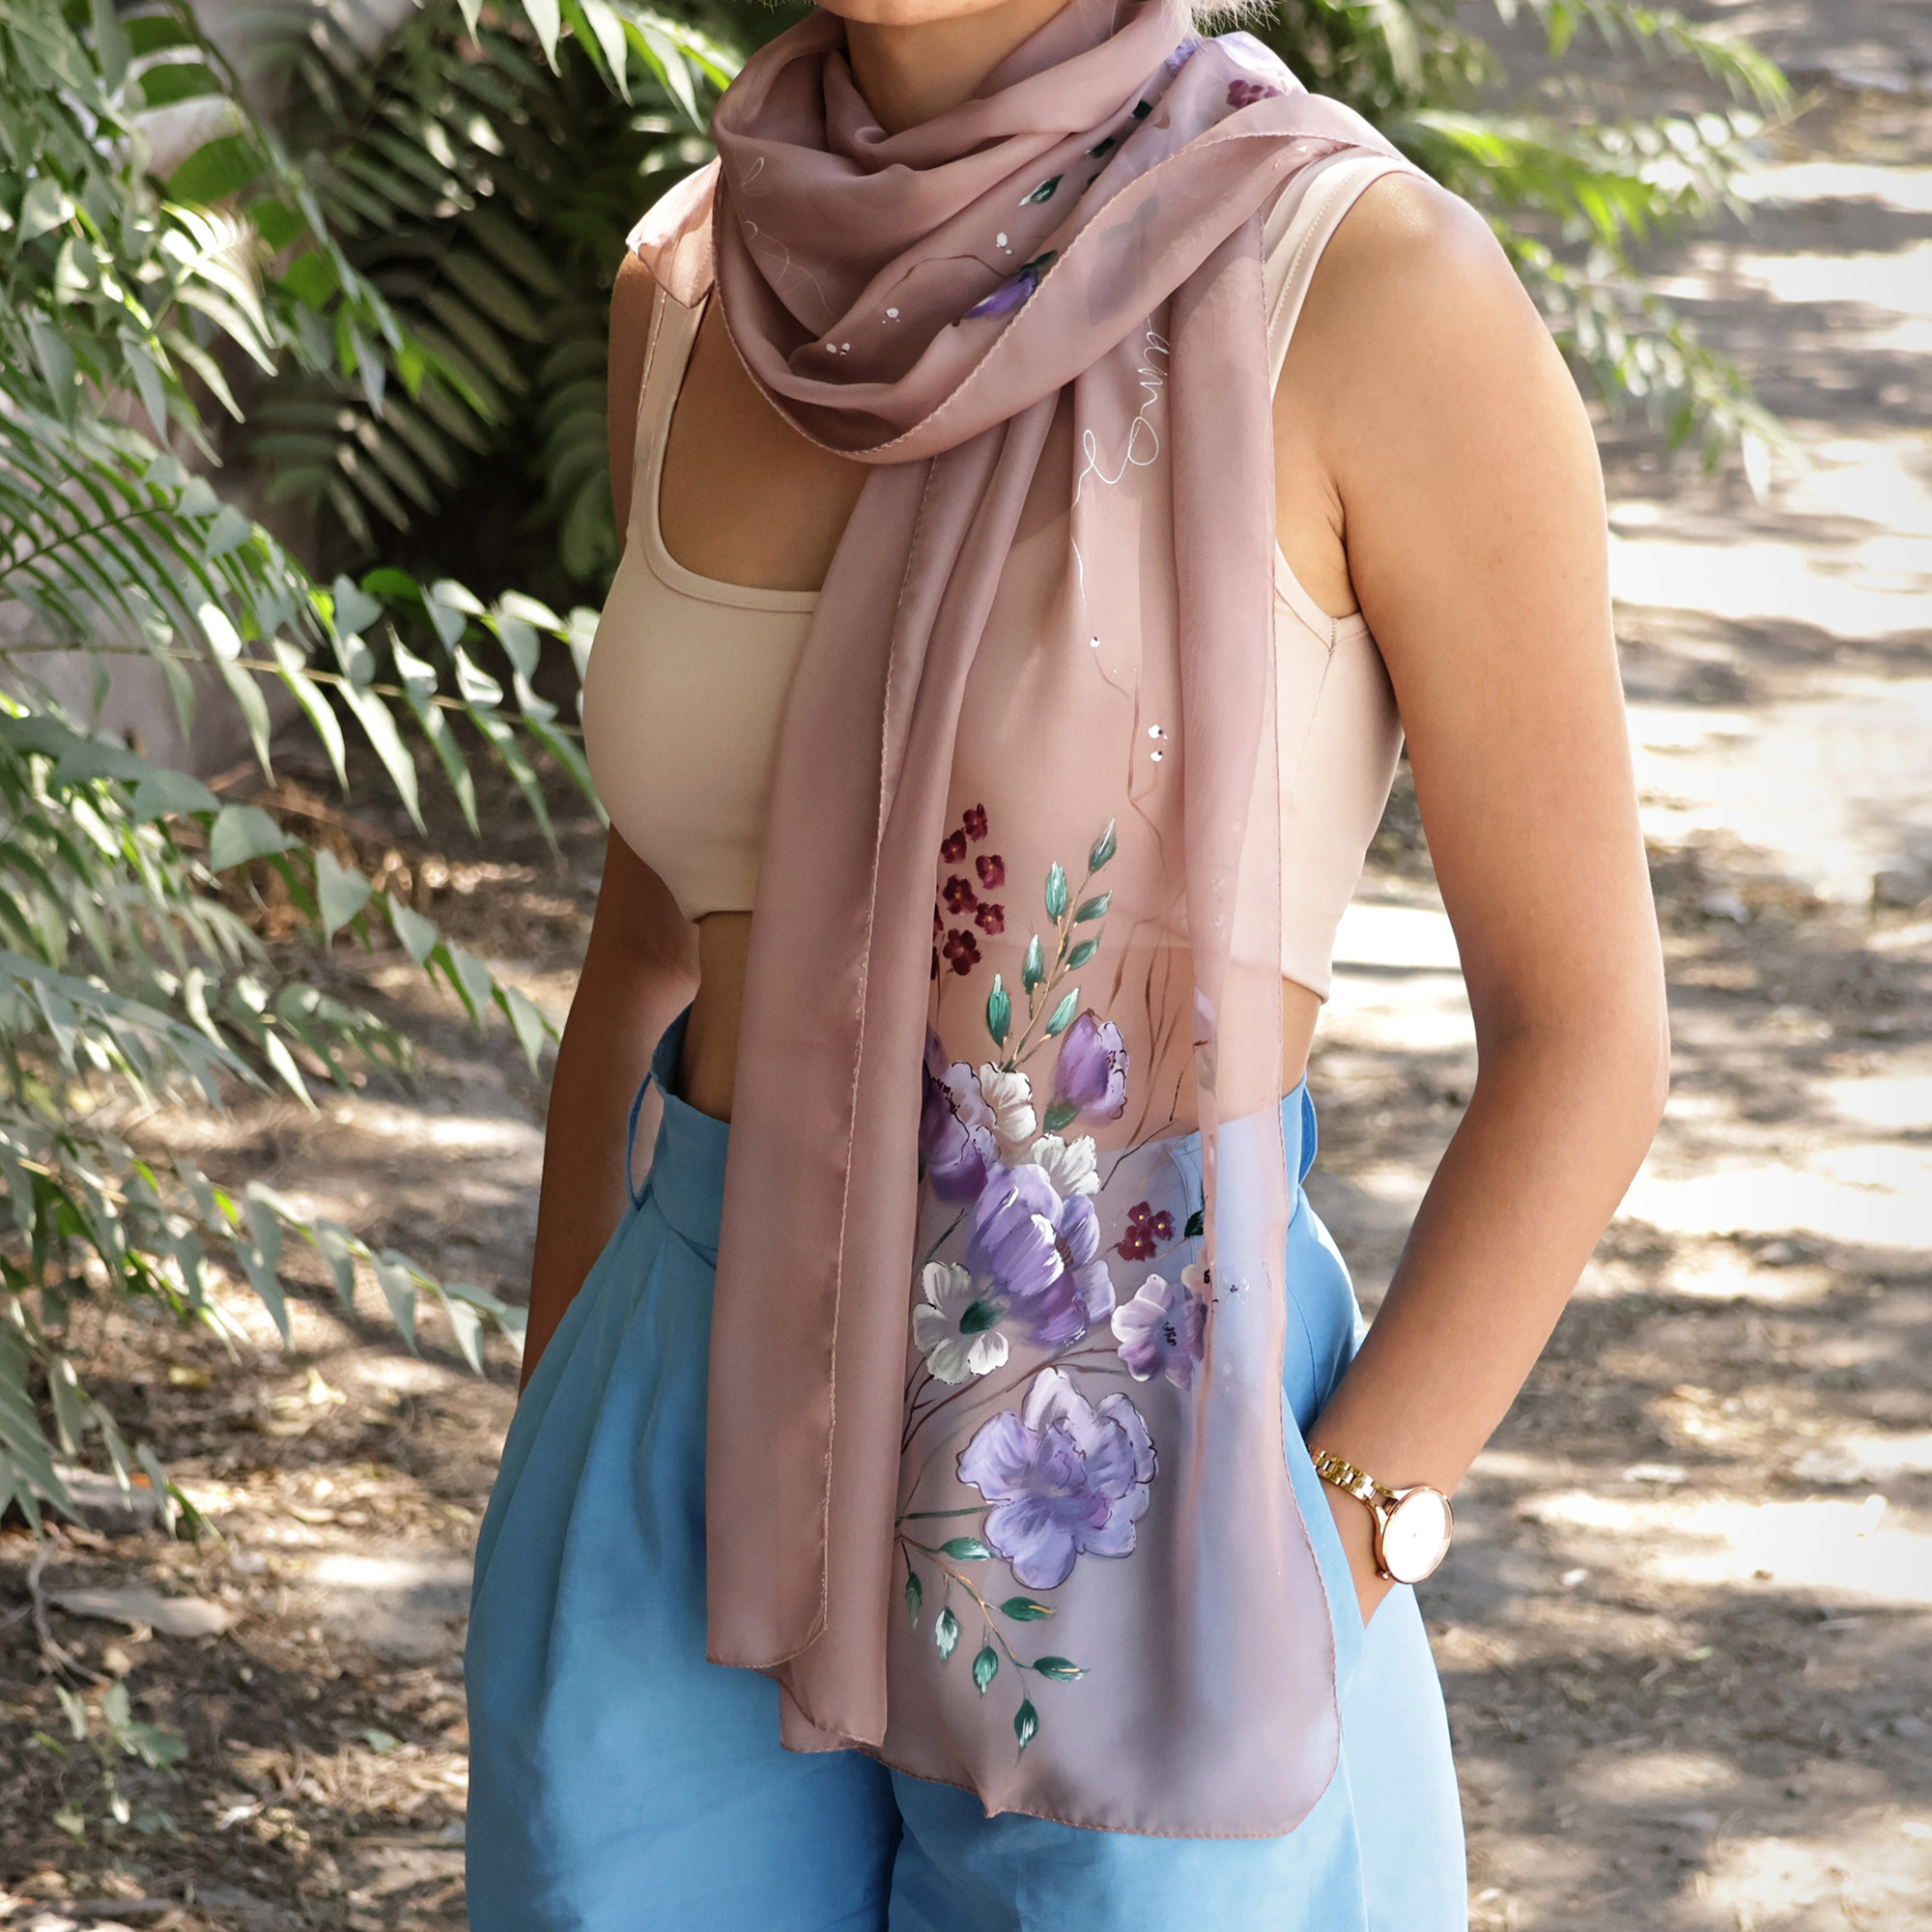 Hand-Painted Floral Semi-Sheer Pink Silk Scarf from Armenia, 'Blooming  Grace